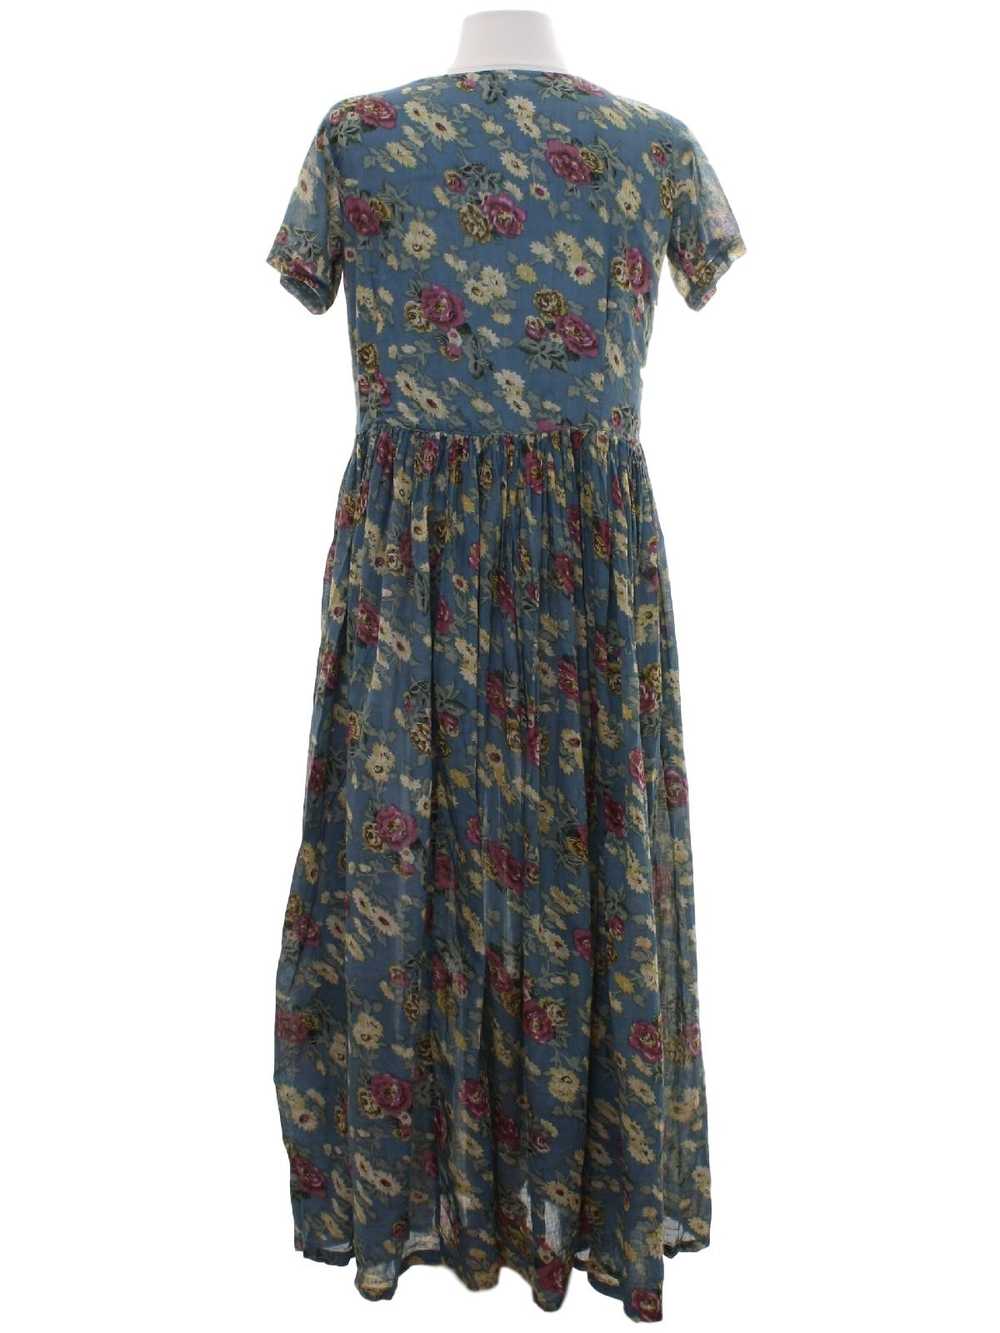 1980's In Time Hippie Maxi Dress - image 3